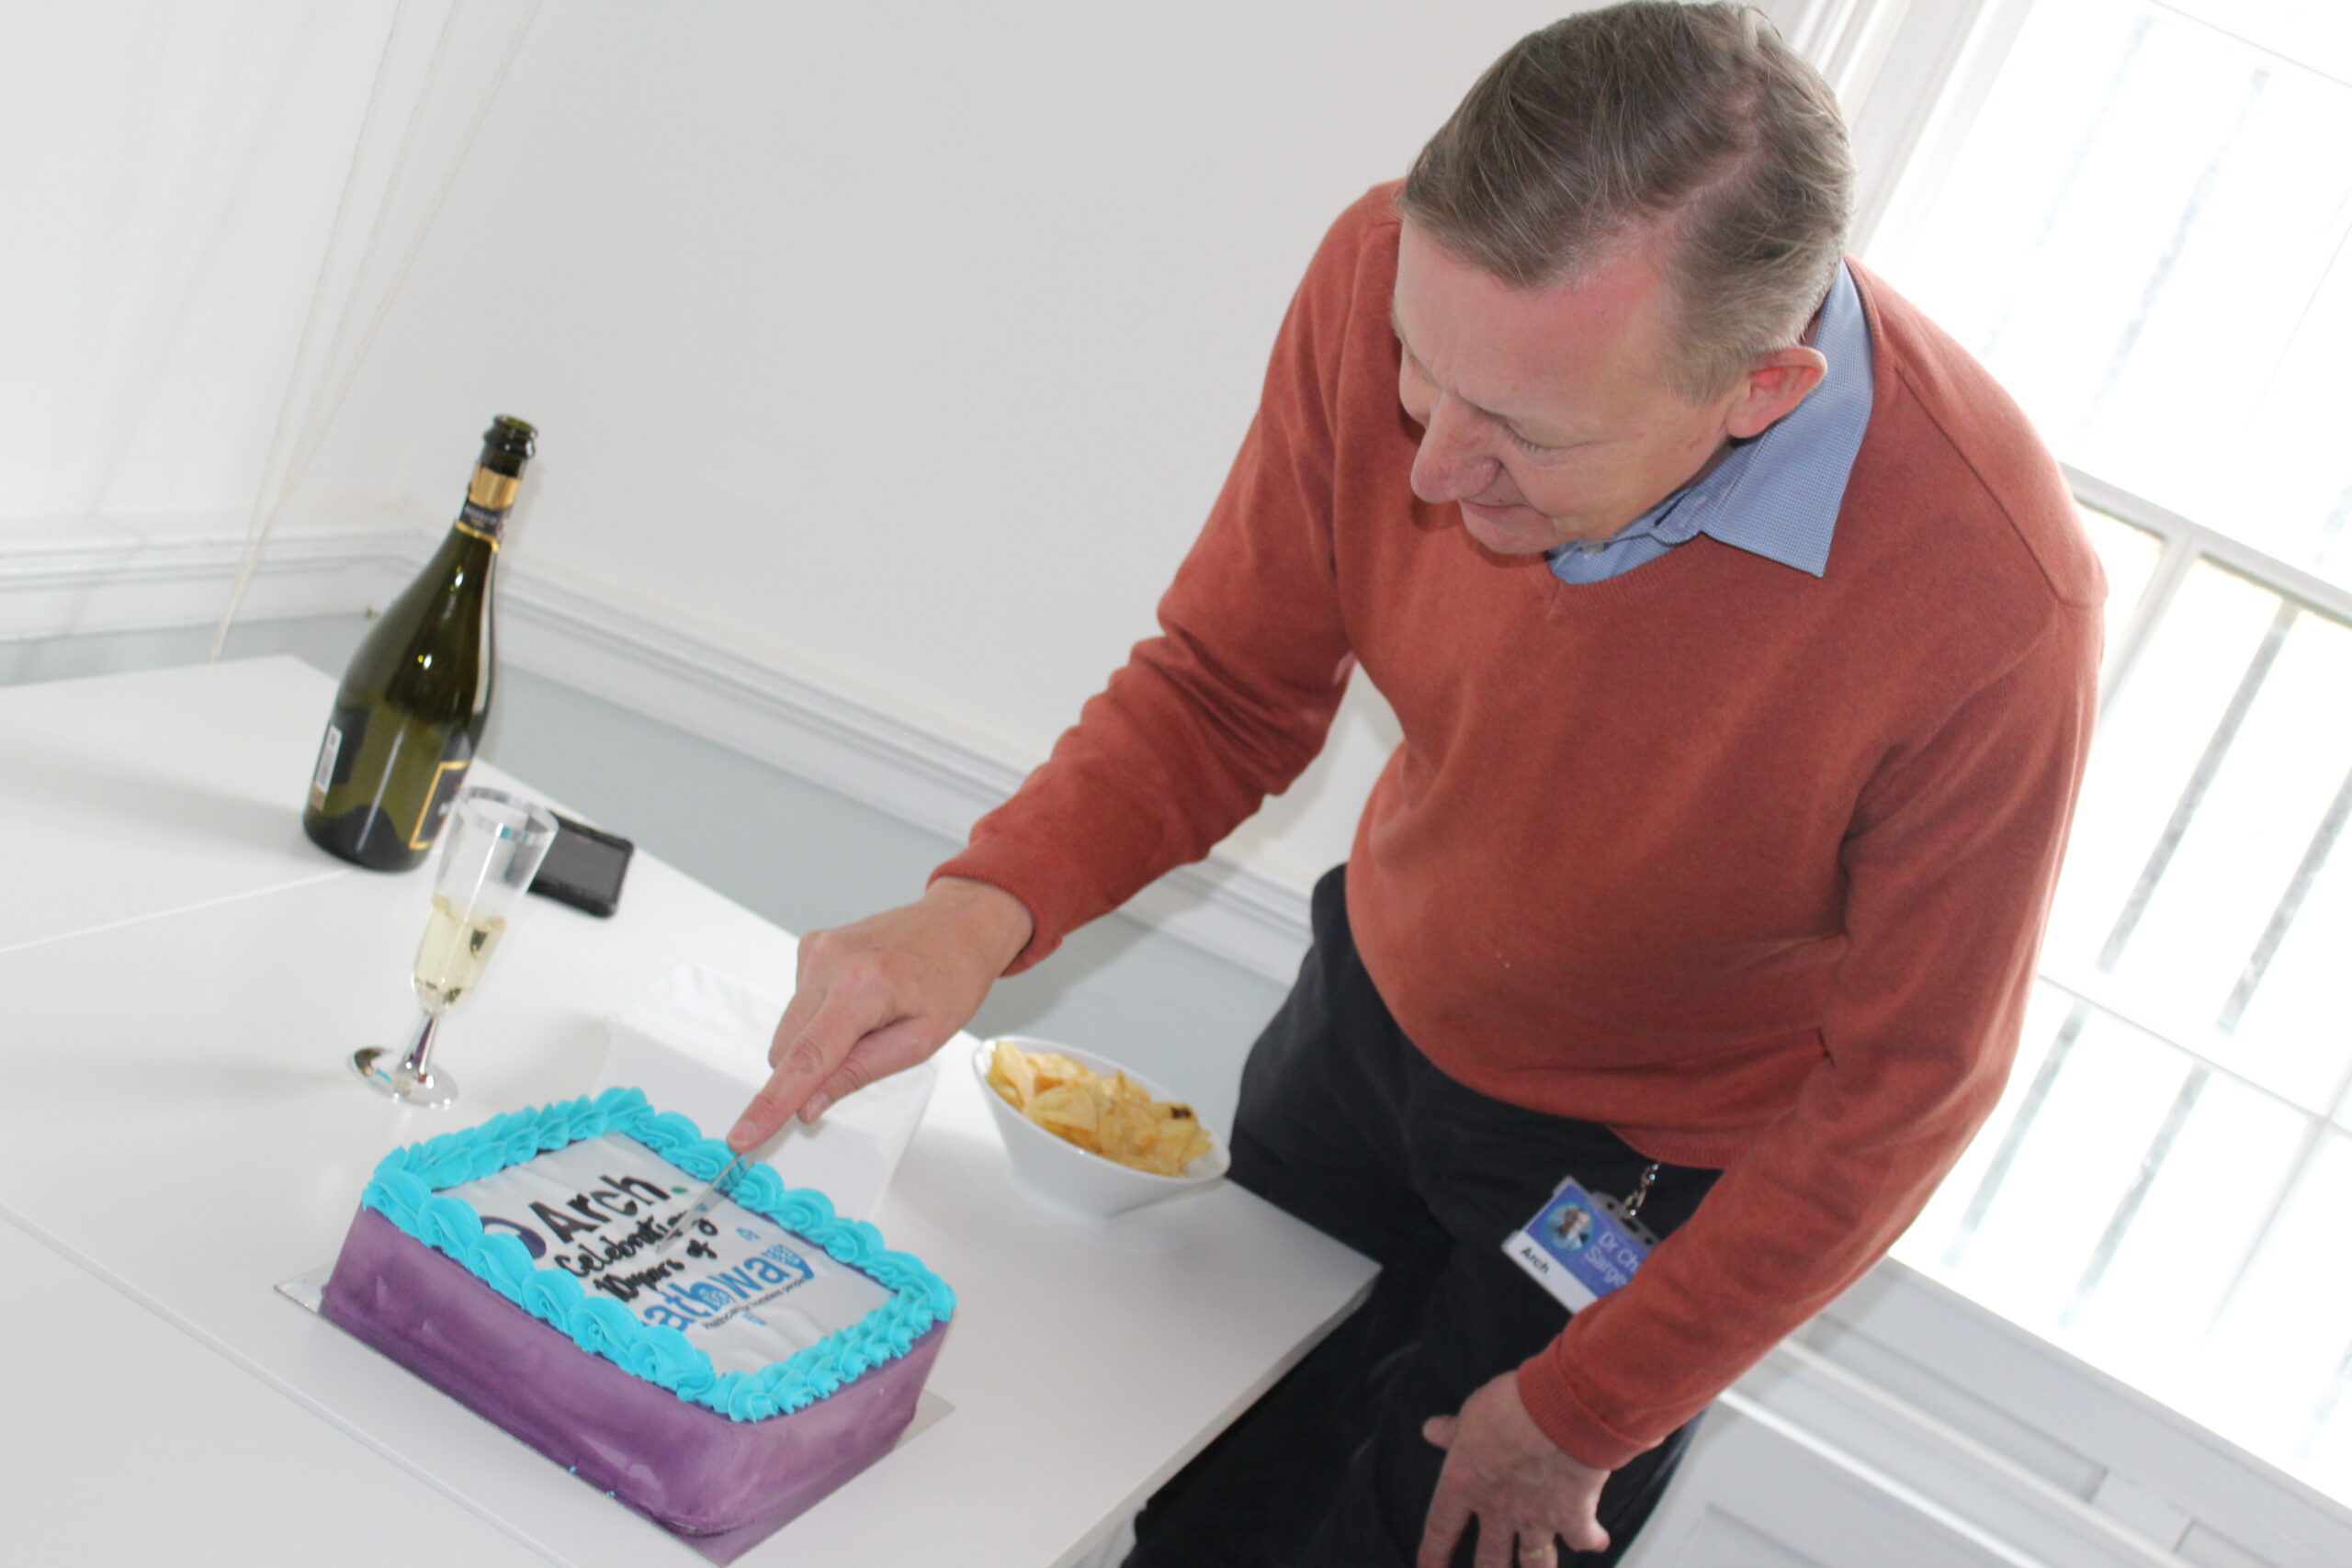 Pathway clinical lead Dr Chris Sargeant cuts the cake to celebrate 10 years of Pathway in Brighton